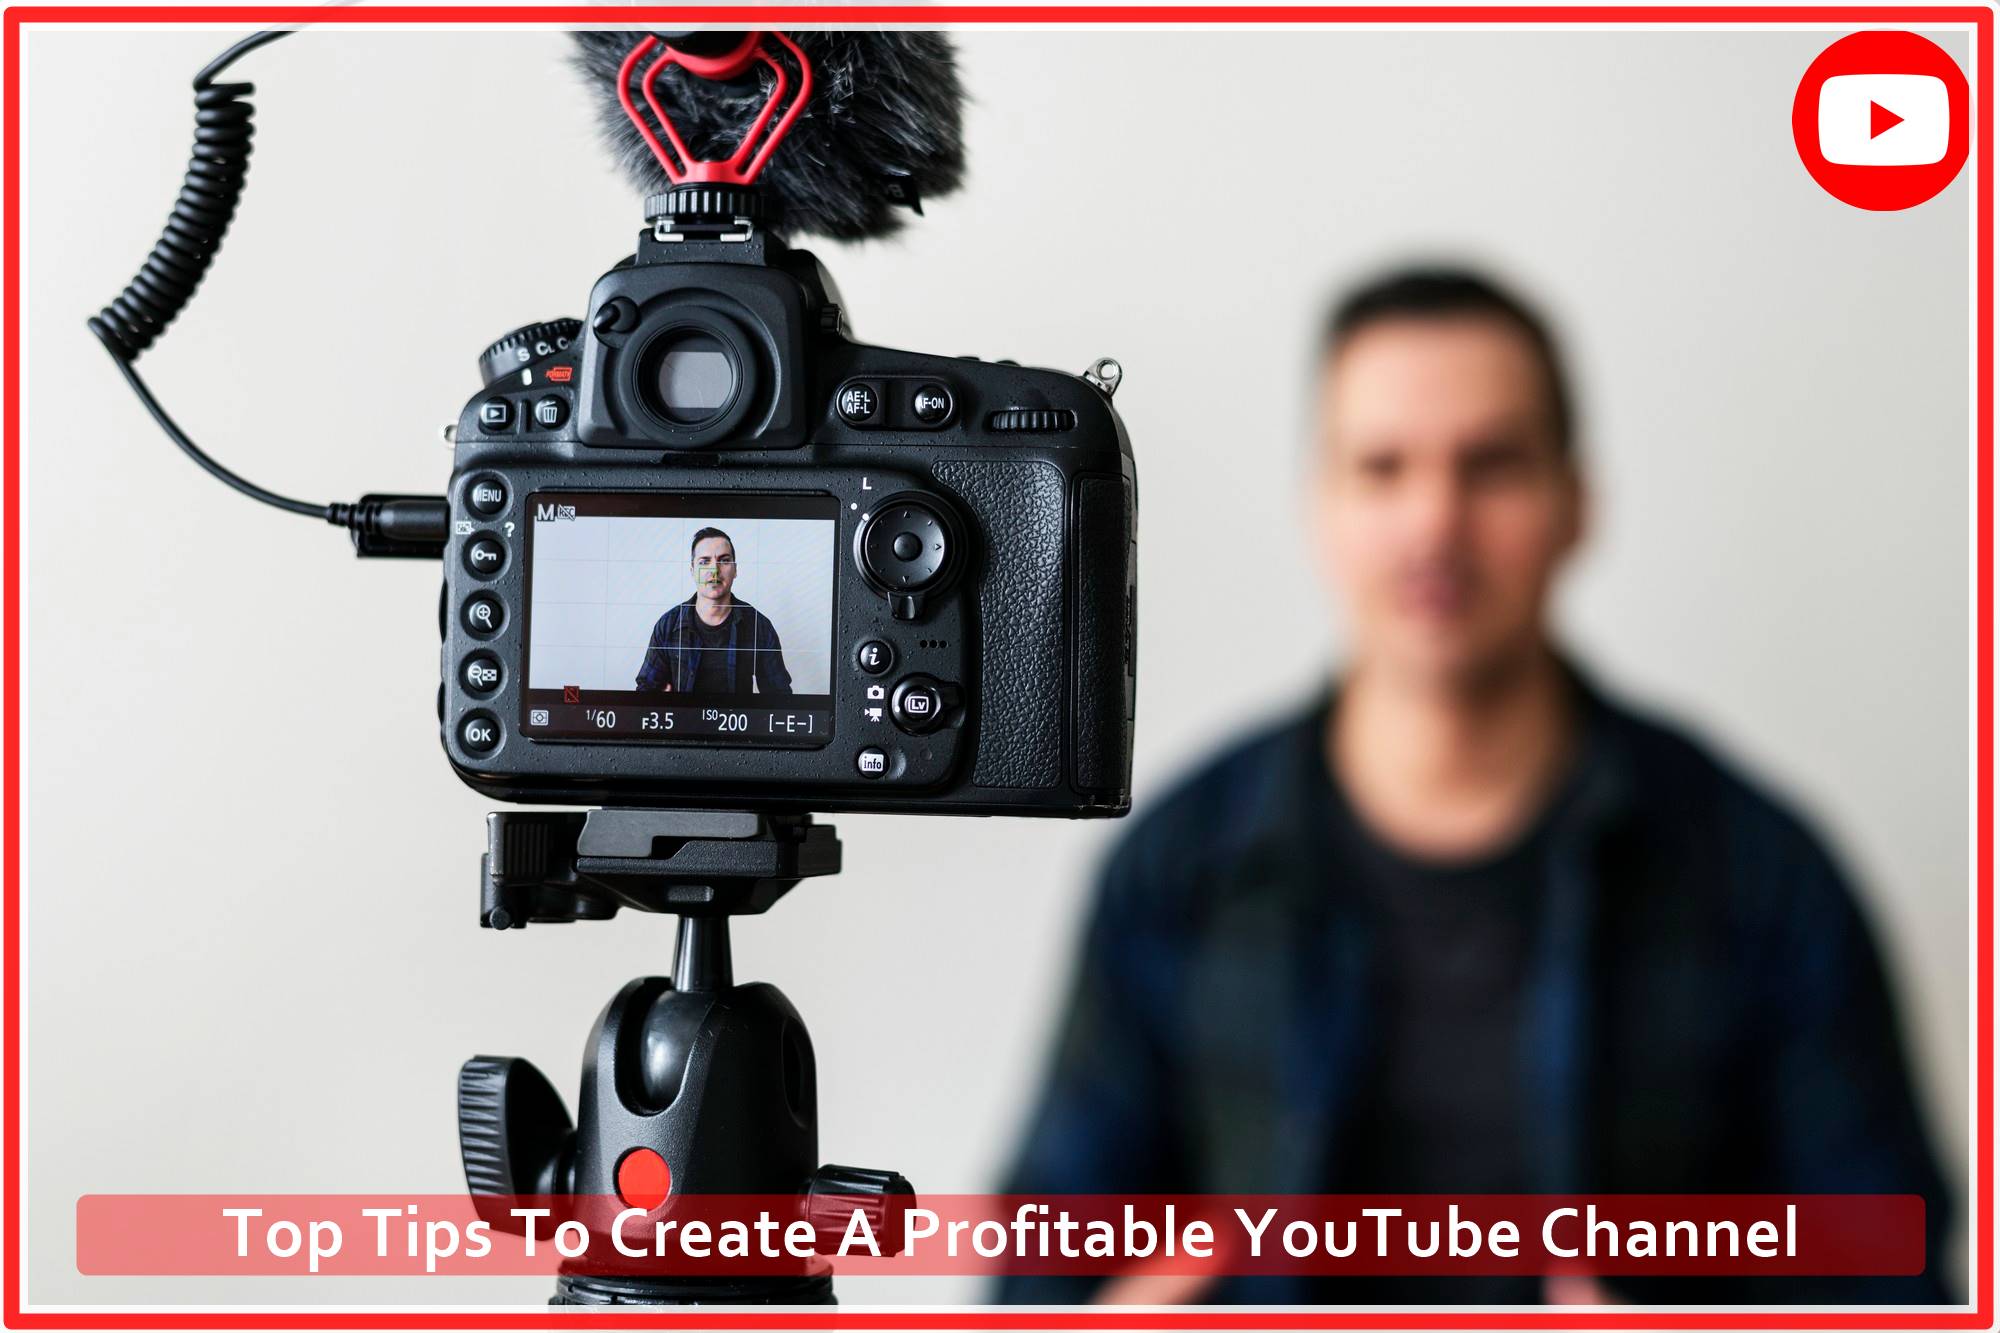 Top Tips To Create A Profitable YouTube Channel